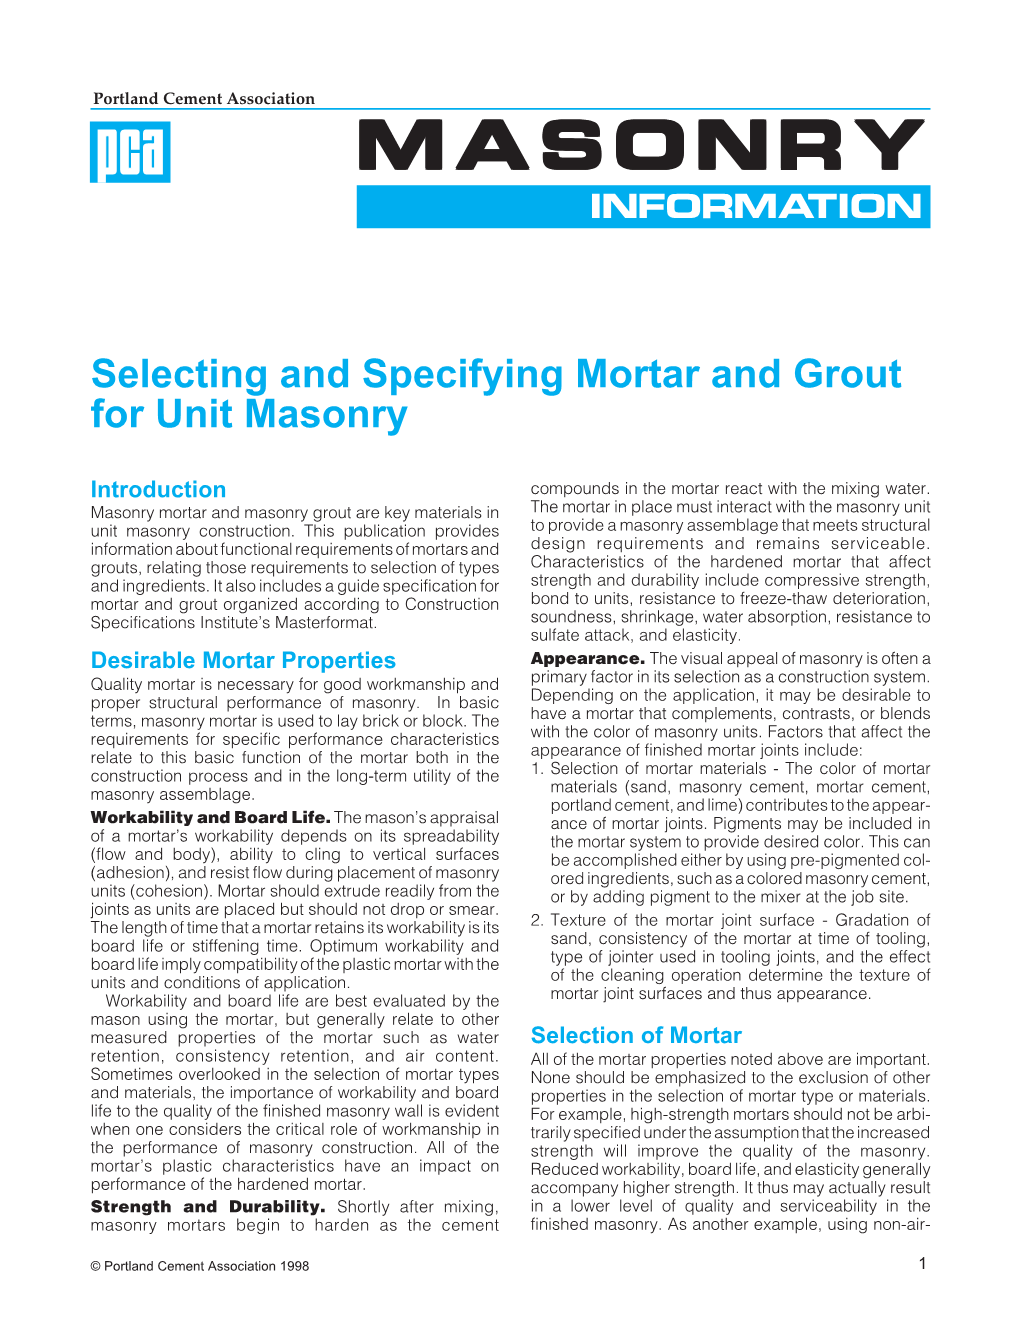 Selecting and Specifying Mortar and Grout for Unit Masonry